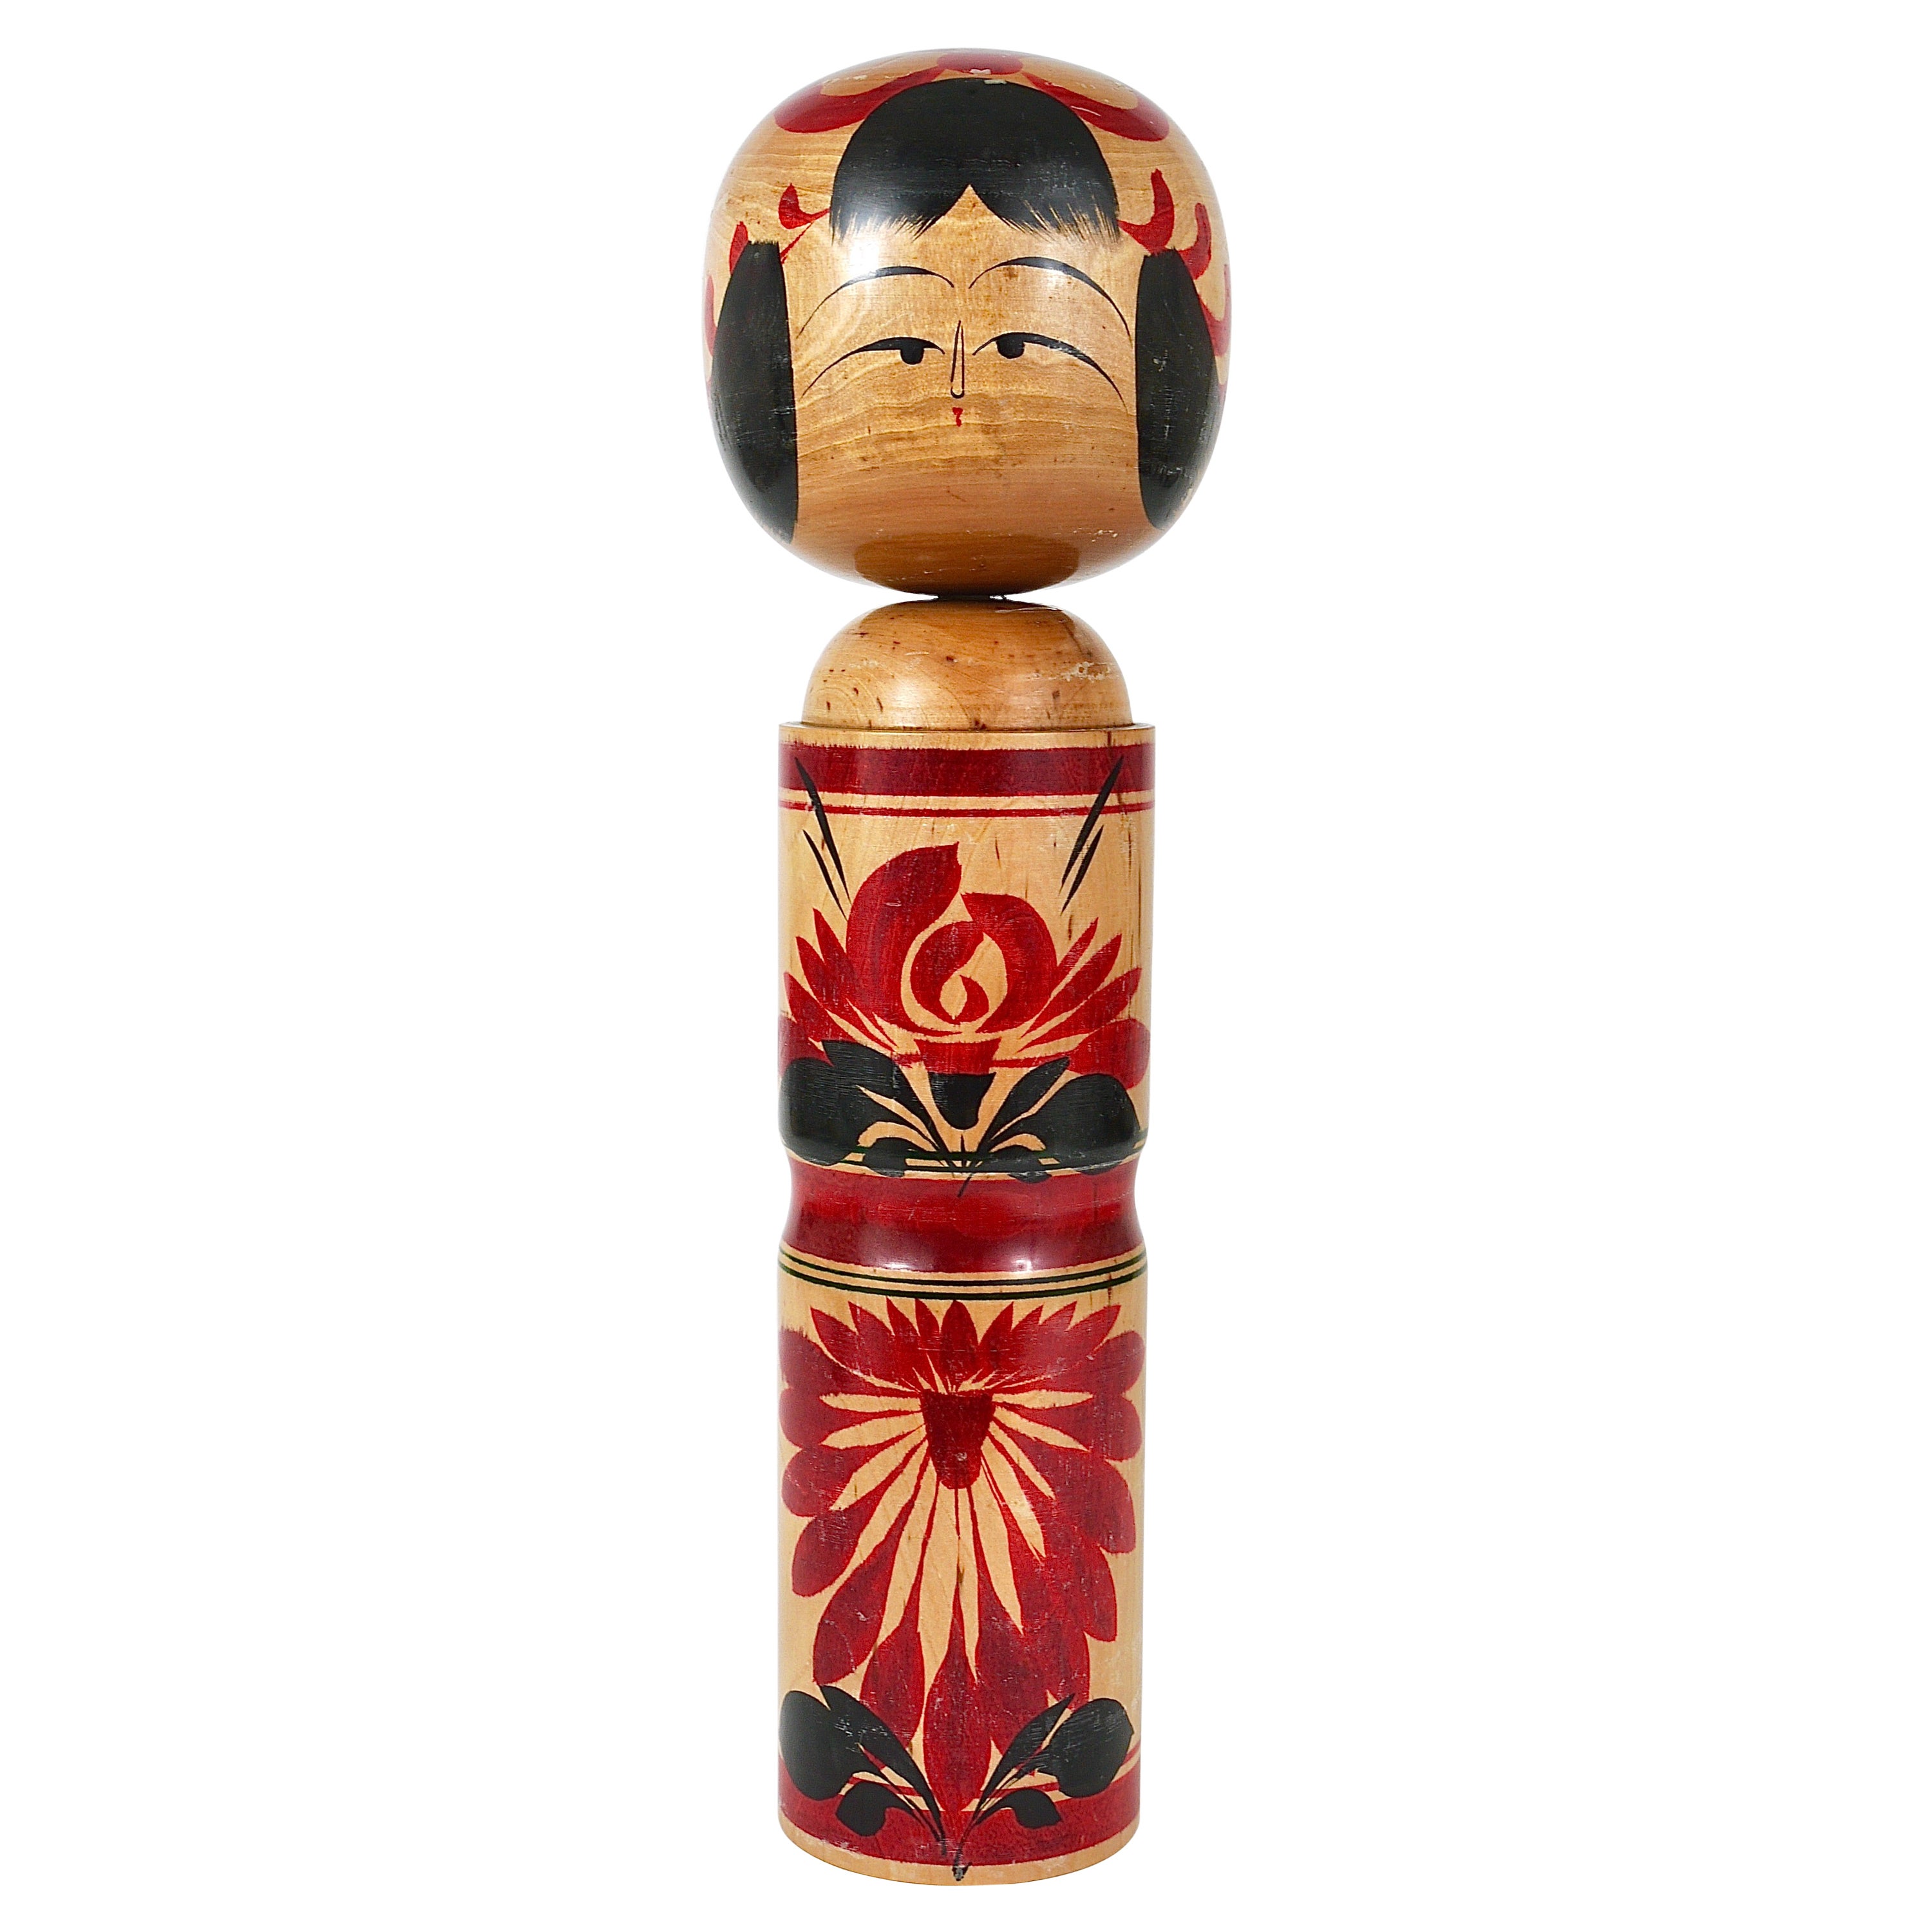 Decorative Kokeshi Doll Sculpture from Northern Japan, Hand-Painted, Signed